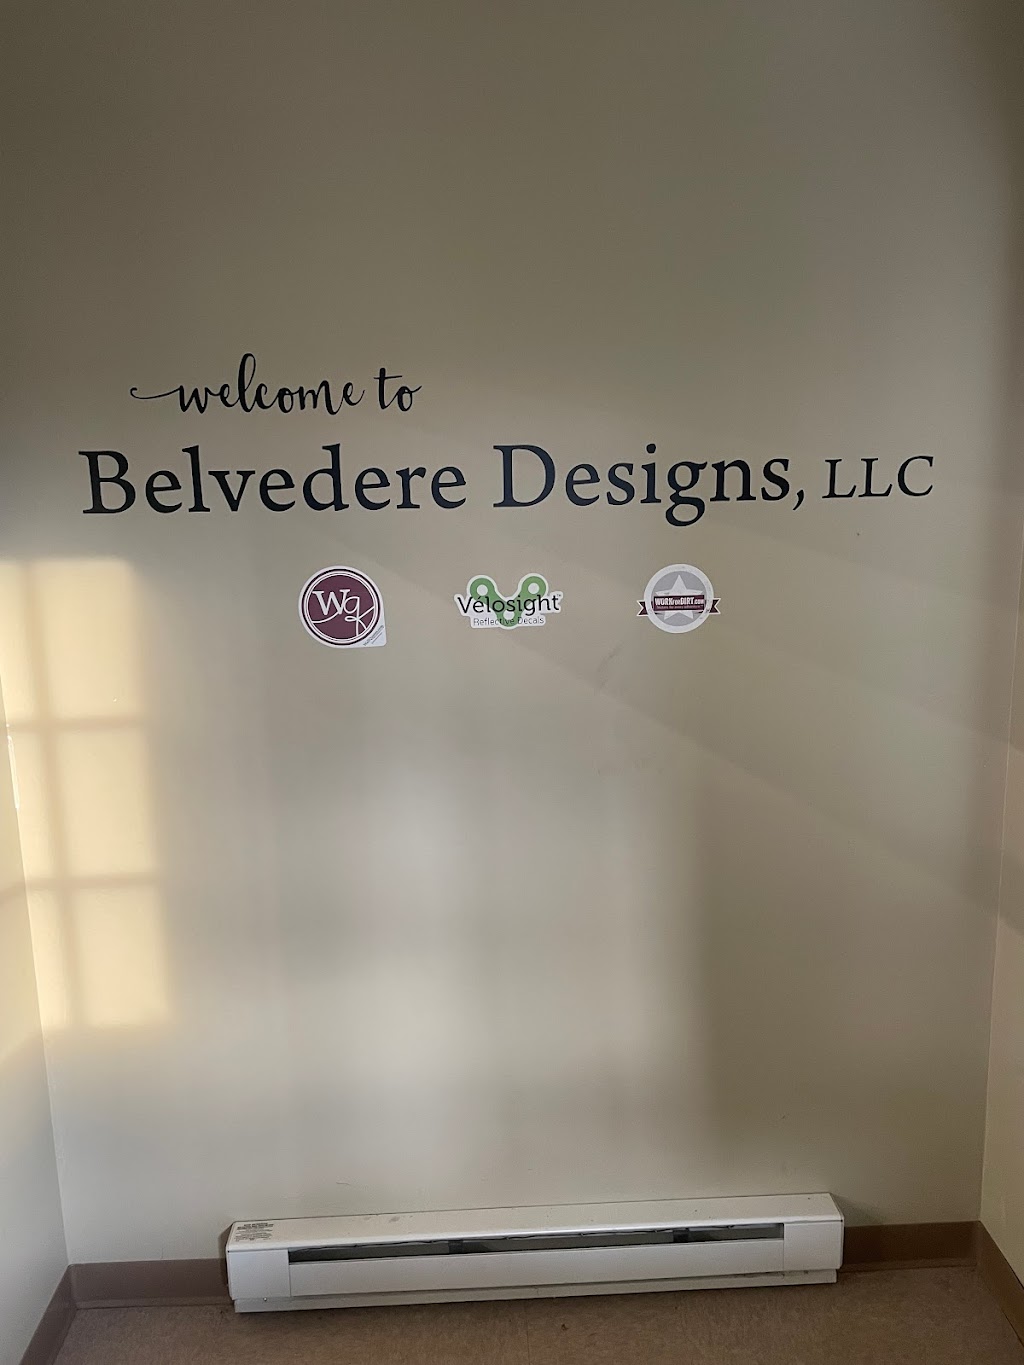 Belvedere Designs - WallQuotes.com | 8691 Wadsworth Rd Suite 120, Wadsworth, OH 44281, USA | Phone: (330) 331-7347